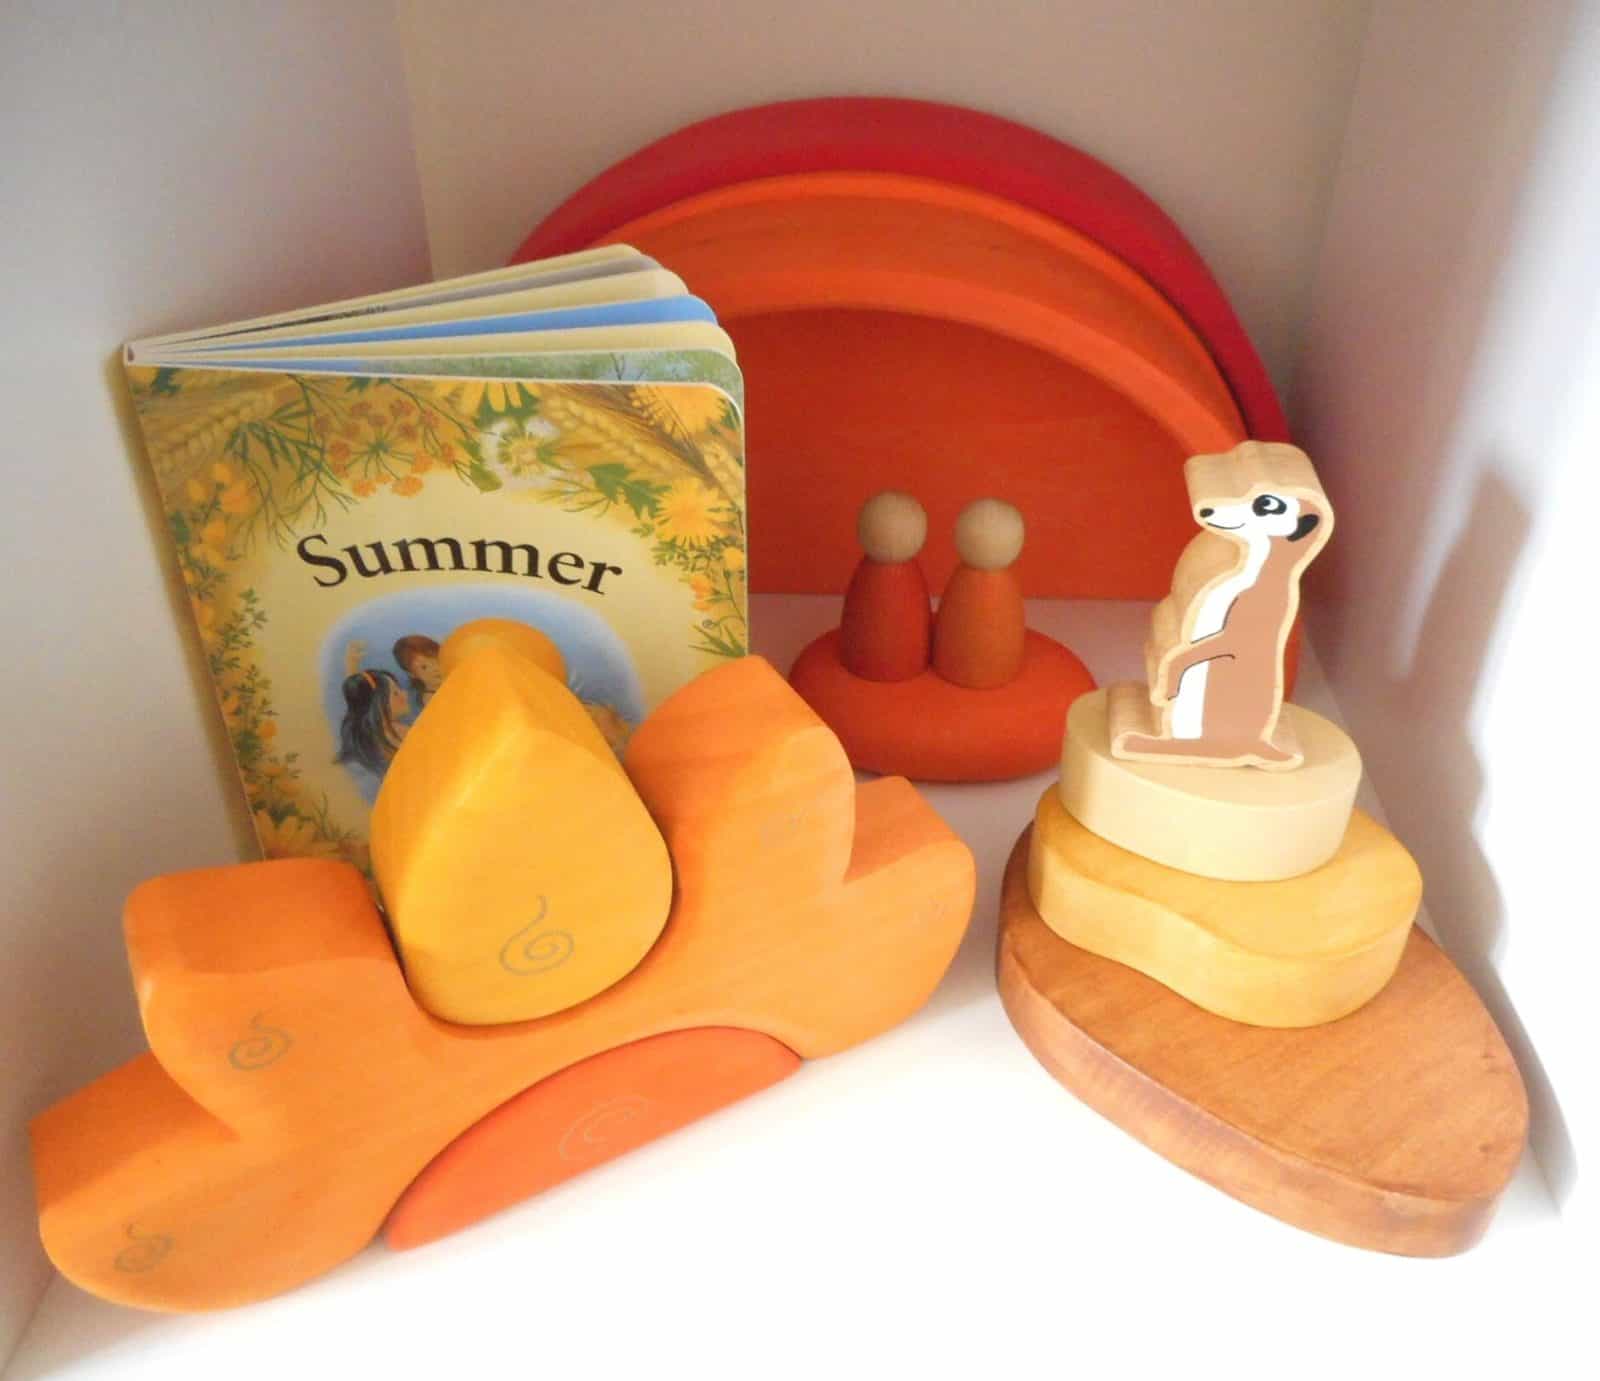 Shelfie - early years - toddler play - Preschooler - Grimms - Grapat - Eric&Albert - books - stories - Ocamora - Wooden Toys - Construction - Stacking- Mindfulness - Puzzles - Colours - Rainbow - Matching - Language - Words - Loose Parts - Summer - Stories